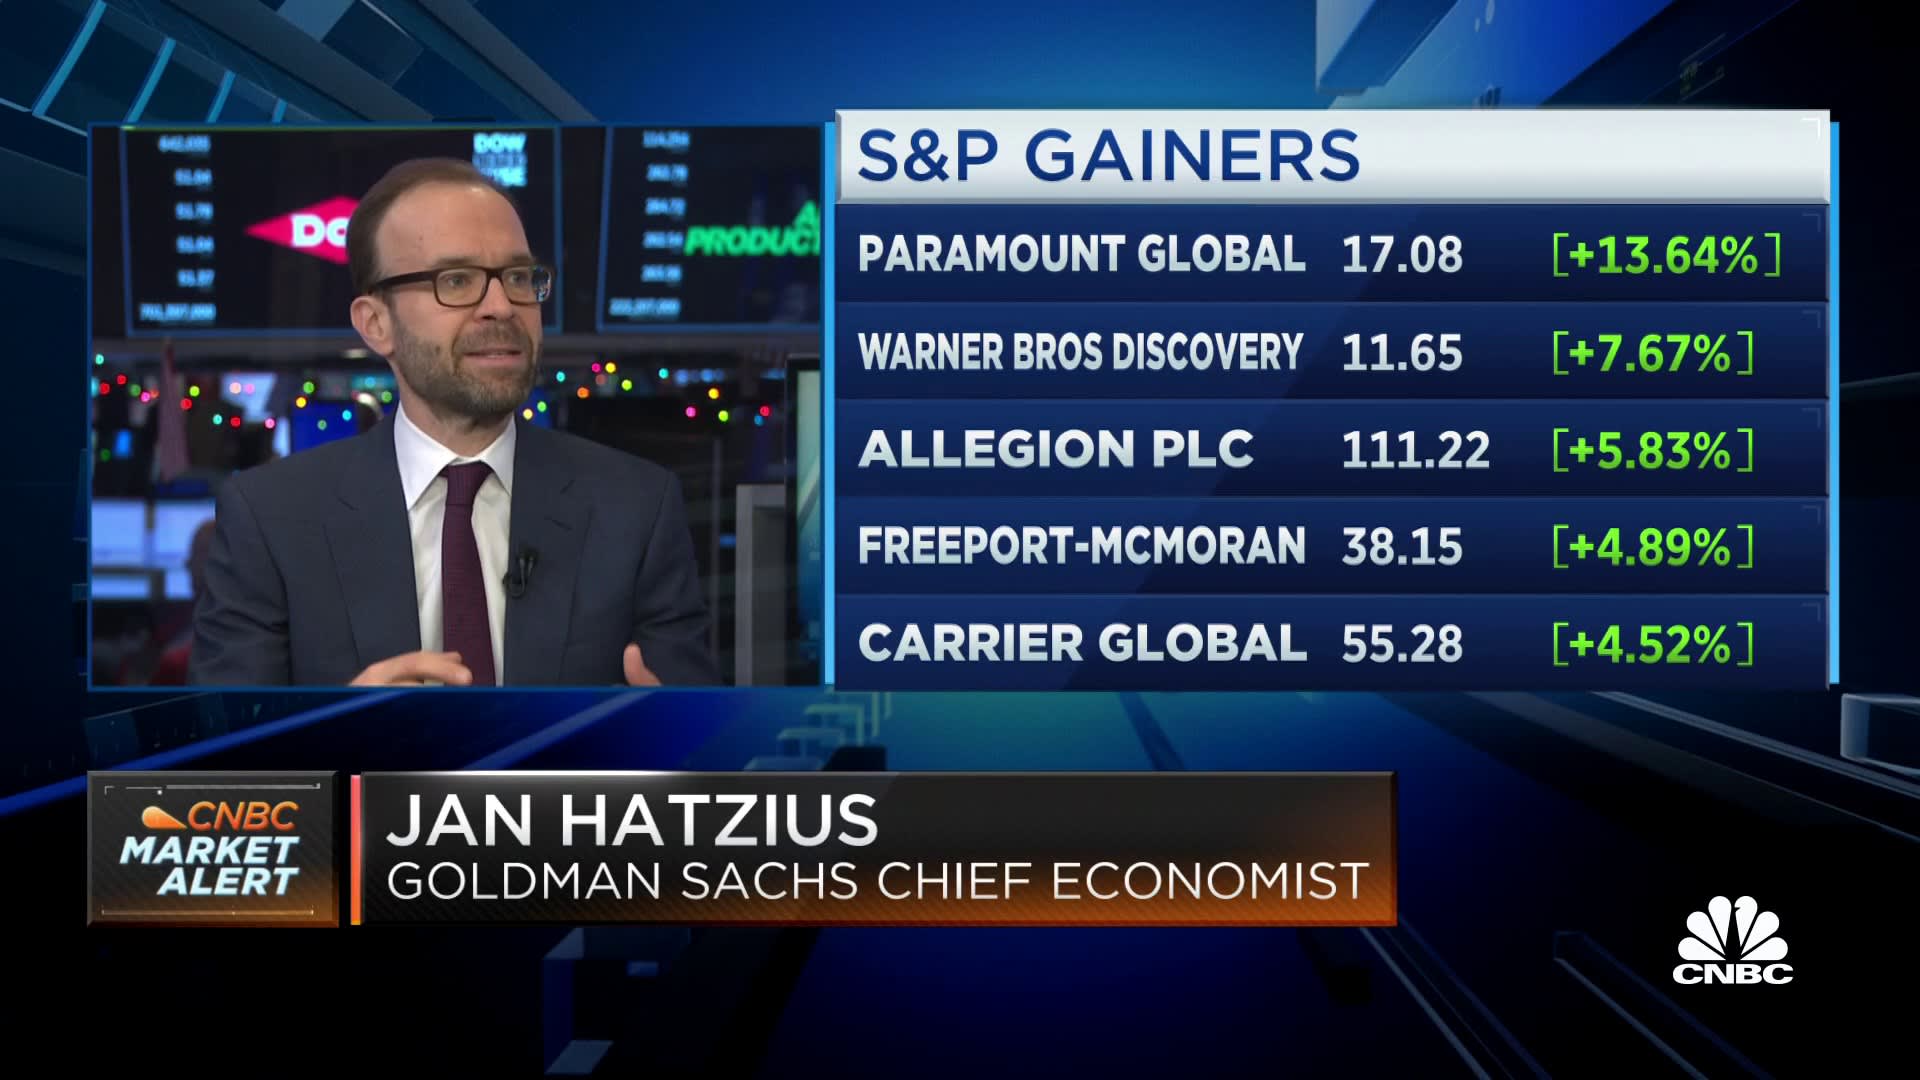 The risk of recession is quite low, says Goldman Sachs' Jan Hatzius